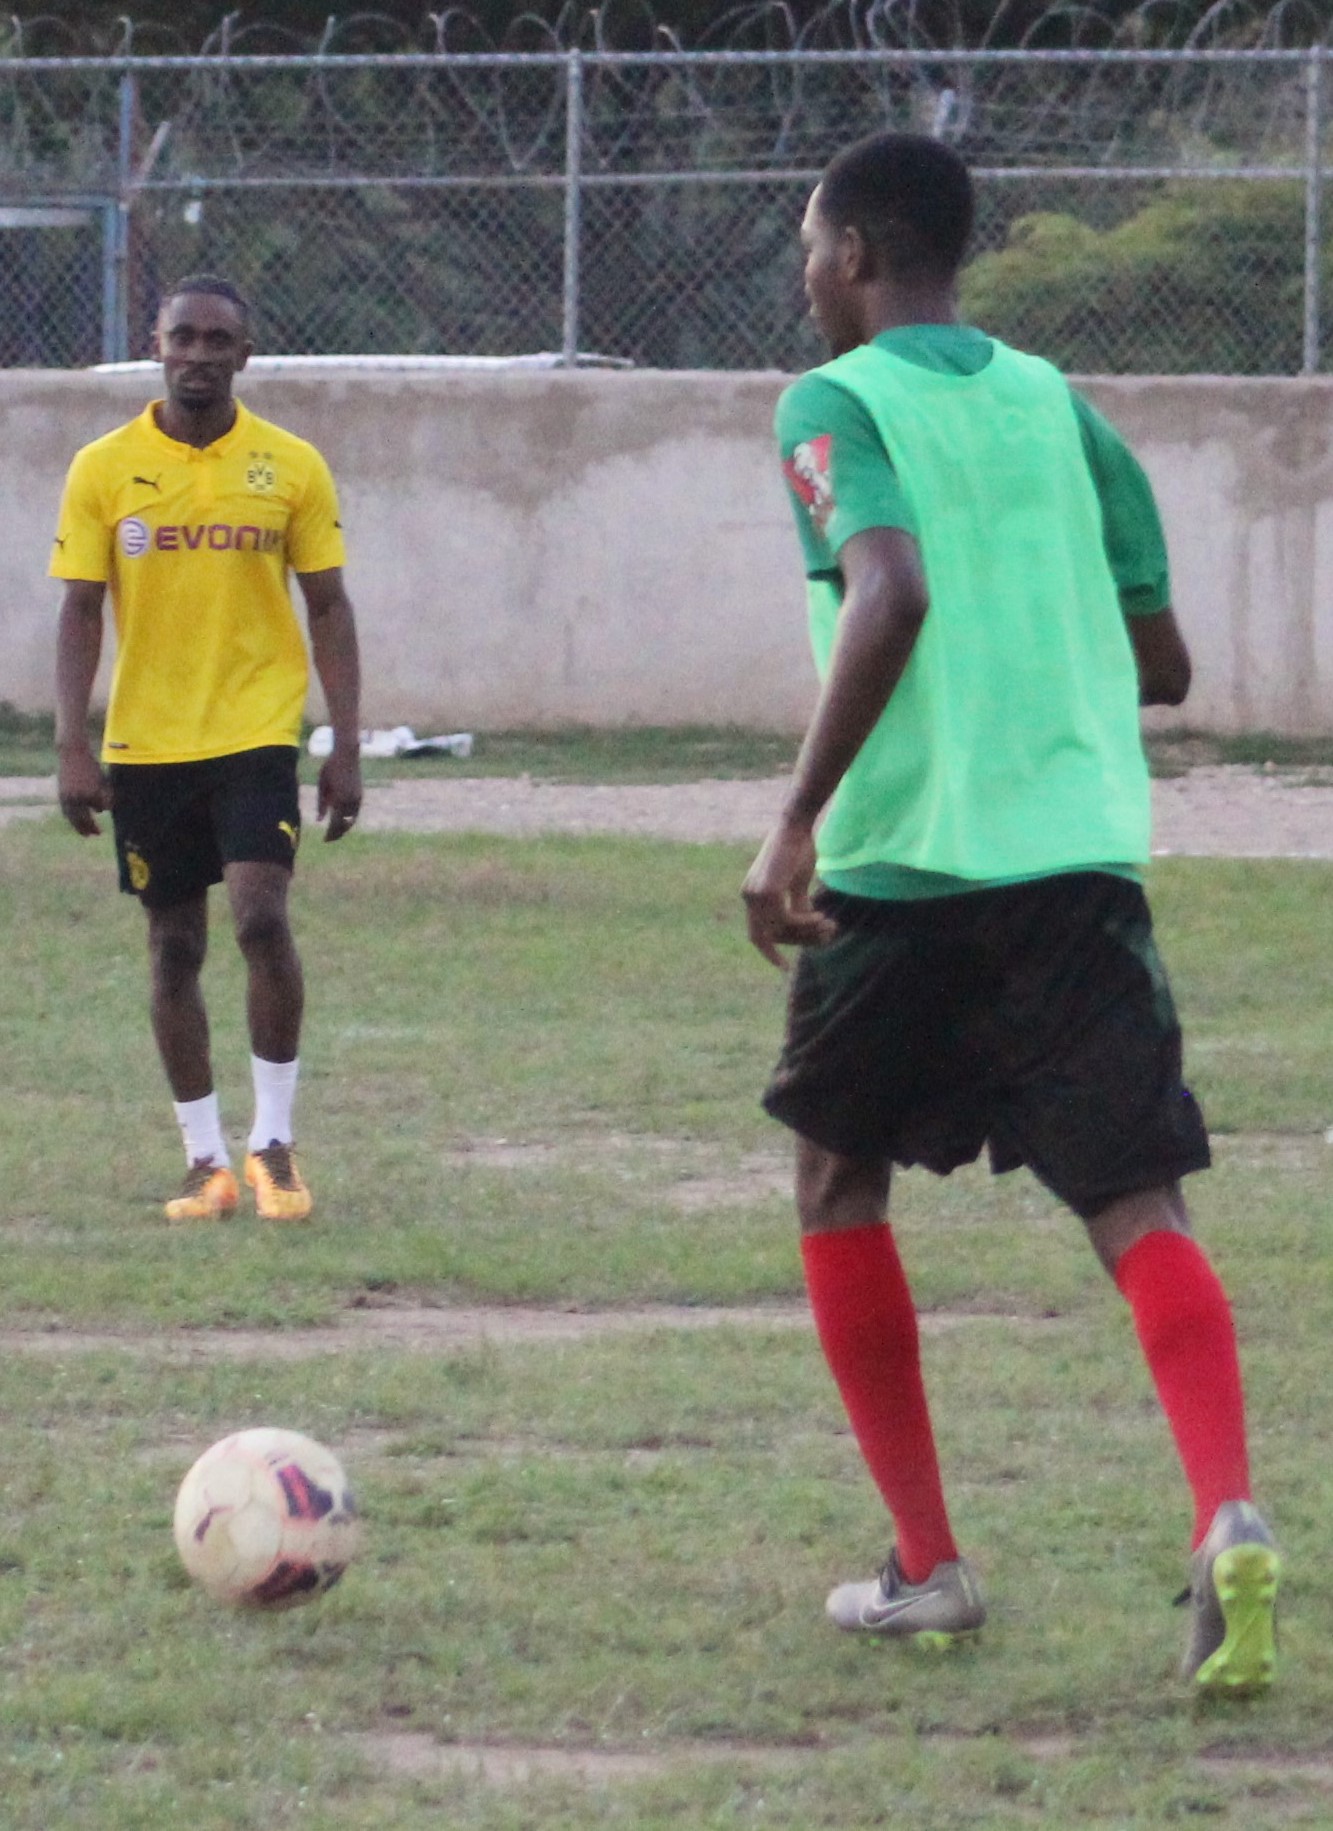 Paul Newman in control of the ball for UTech, Jamaica facing a tired looking Christopher Martin of the Celebrities team during their practice match against UTech, Jamaica on October 7 2016.